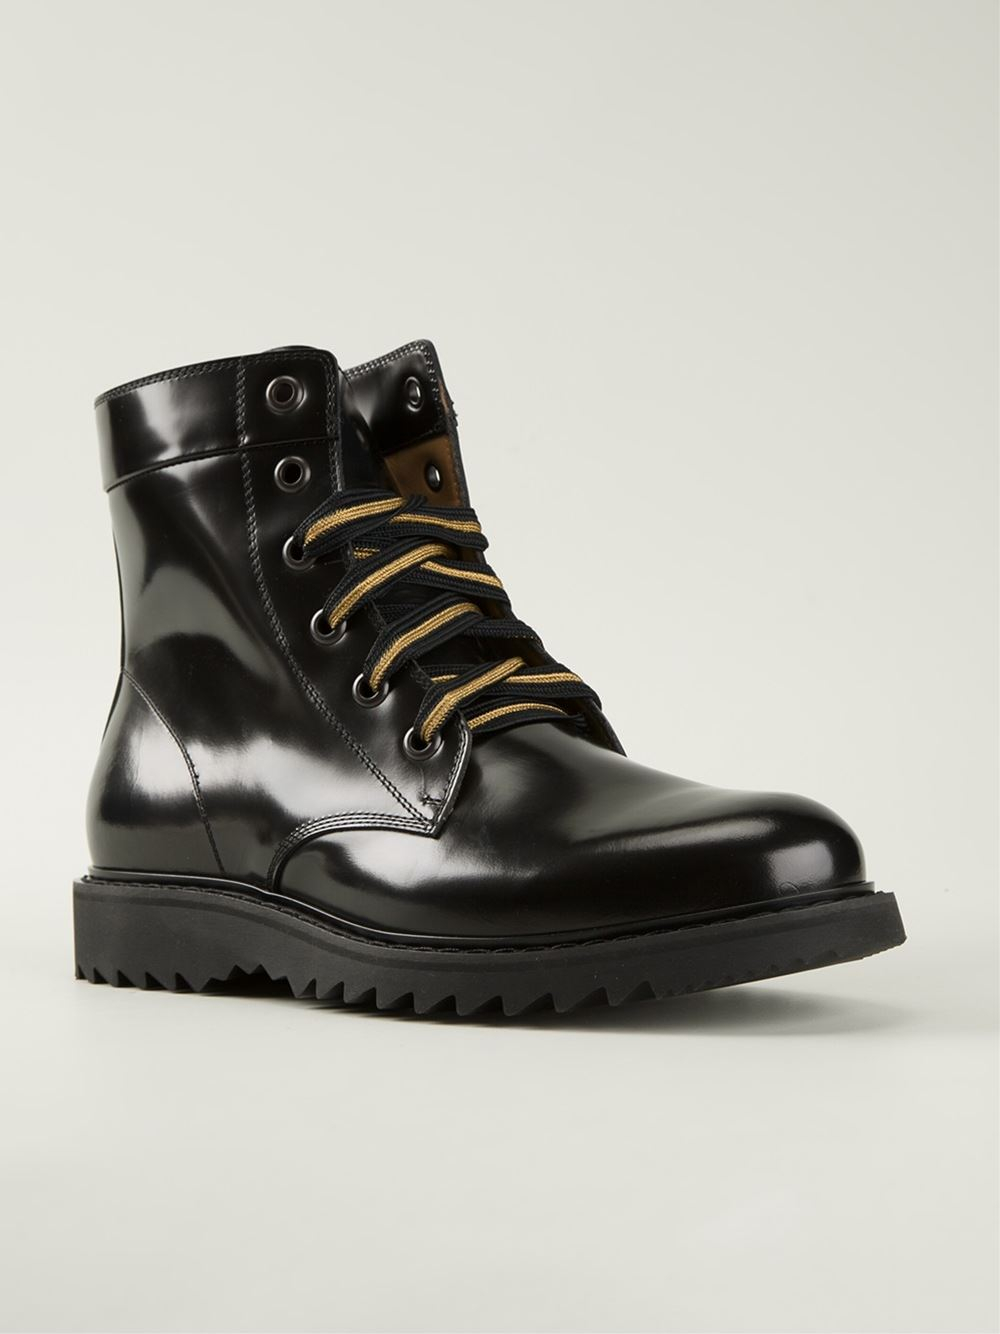 Lyst - Marc Jacobs Lace-Up Ankle Boots in Black for Men